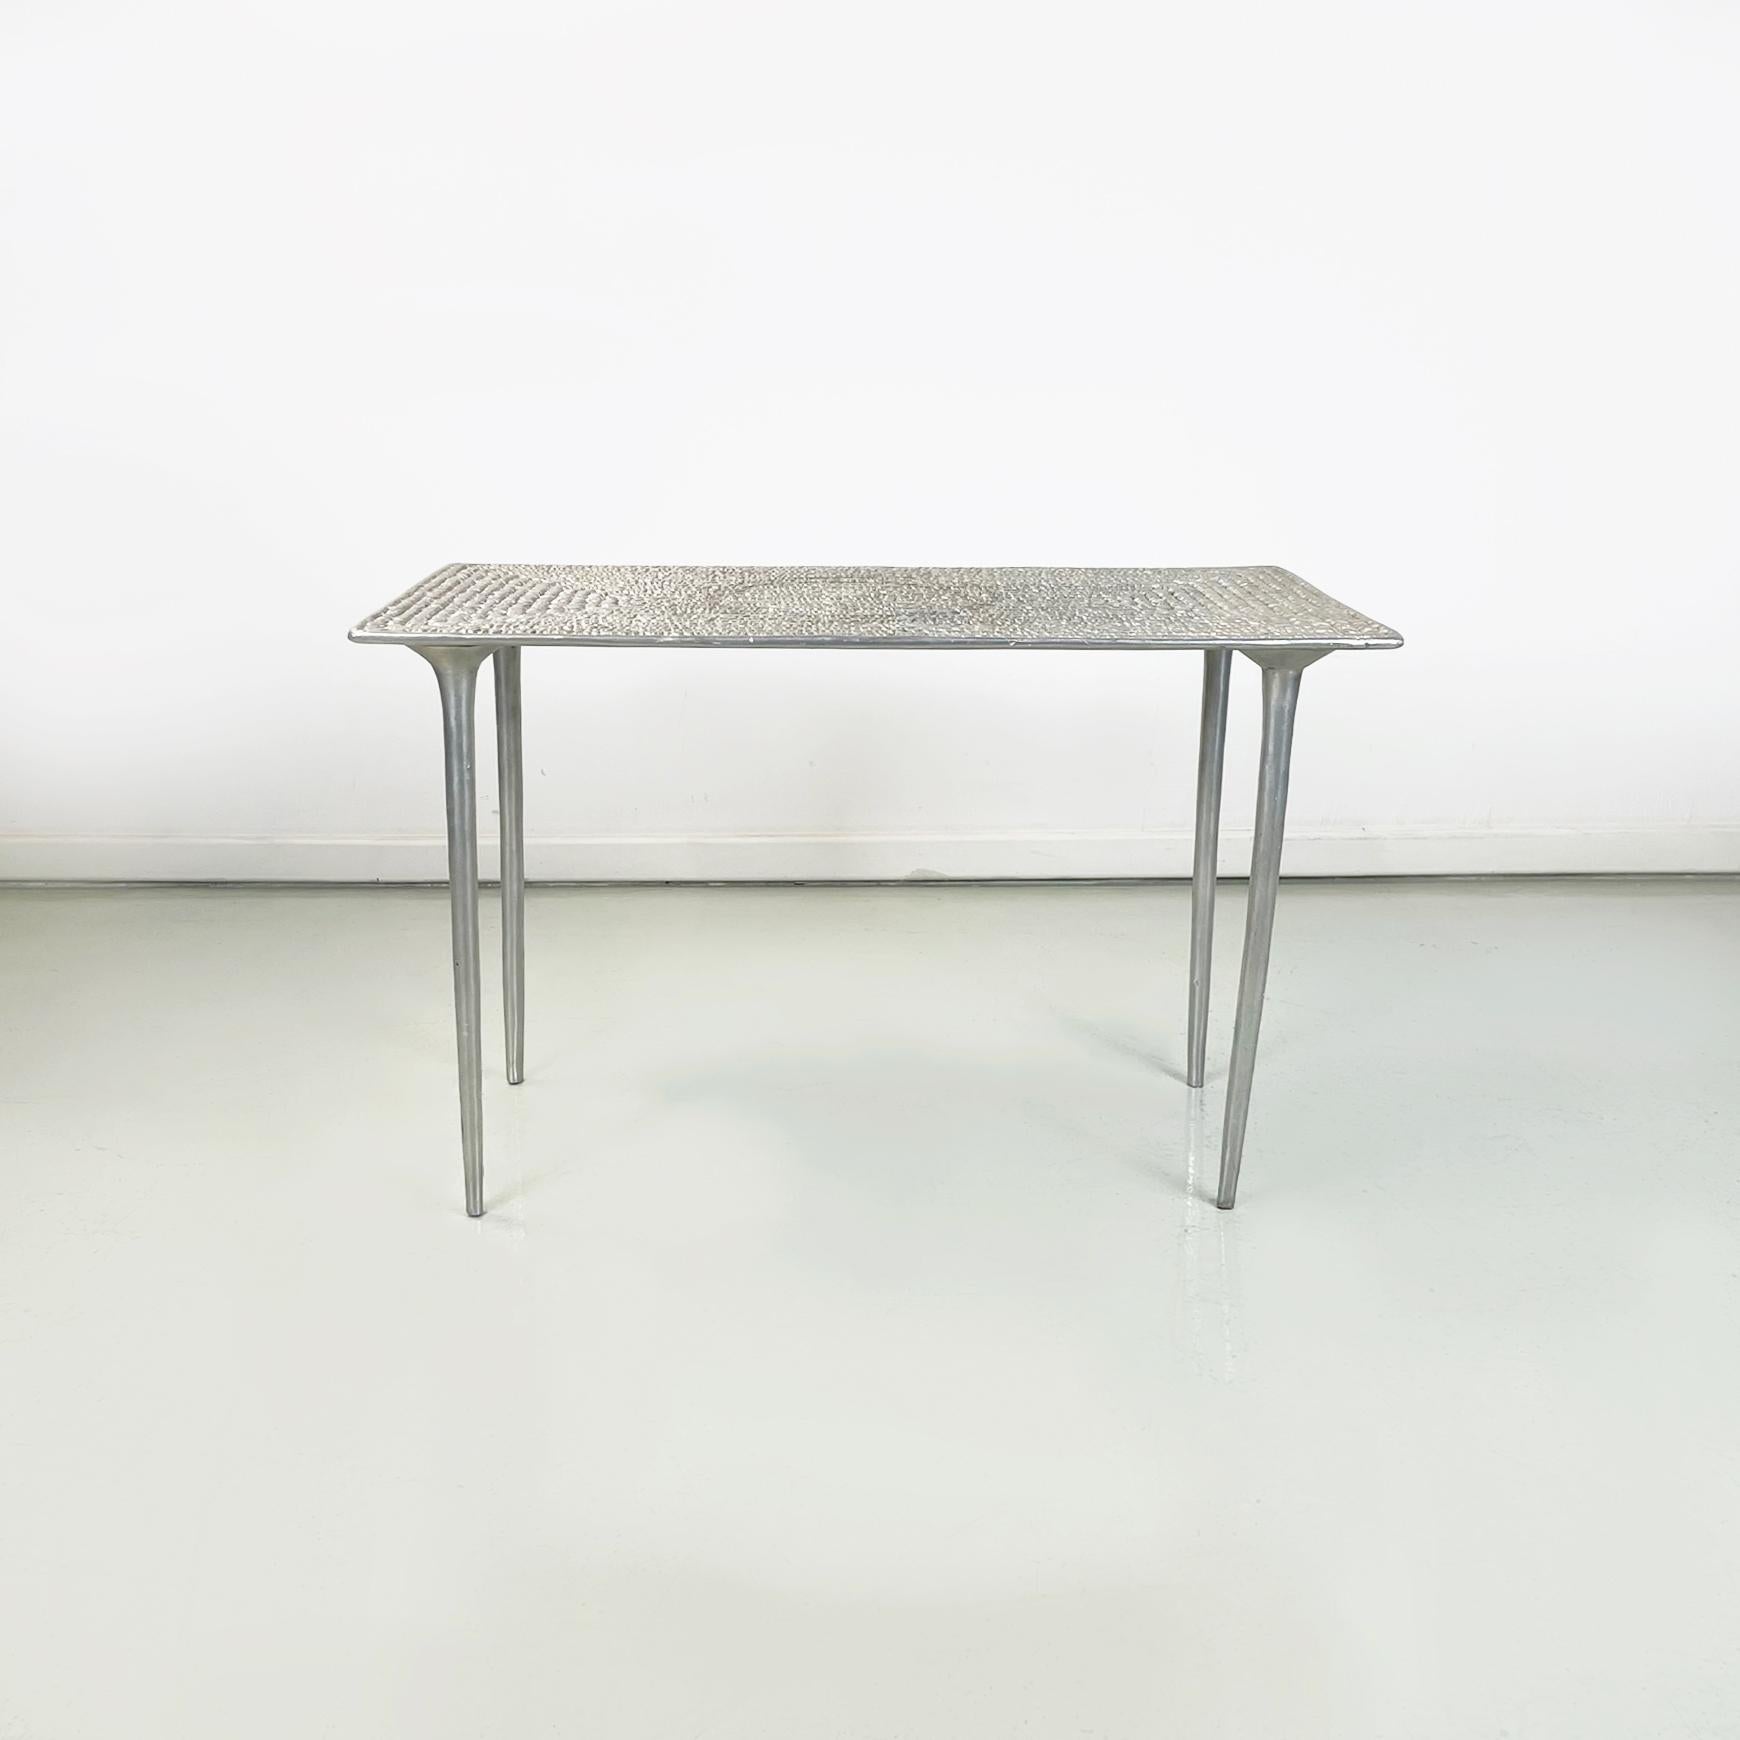 Italian modern rectangular Coffee table in aluminum, 1980-1990s
Coffee table entirely in aluminum. The rectangular top is finely worked. Legs with round section. Suitable for both indoor and outdoor use such as garden.
1980-1990 approx.
Good